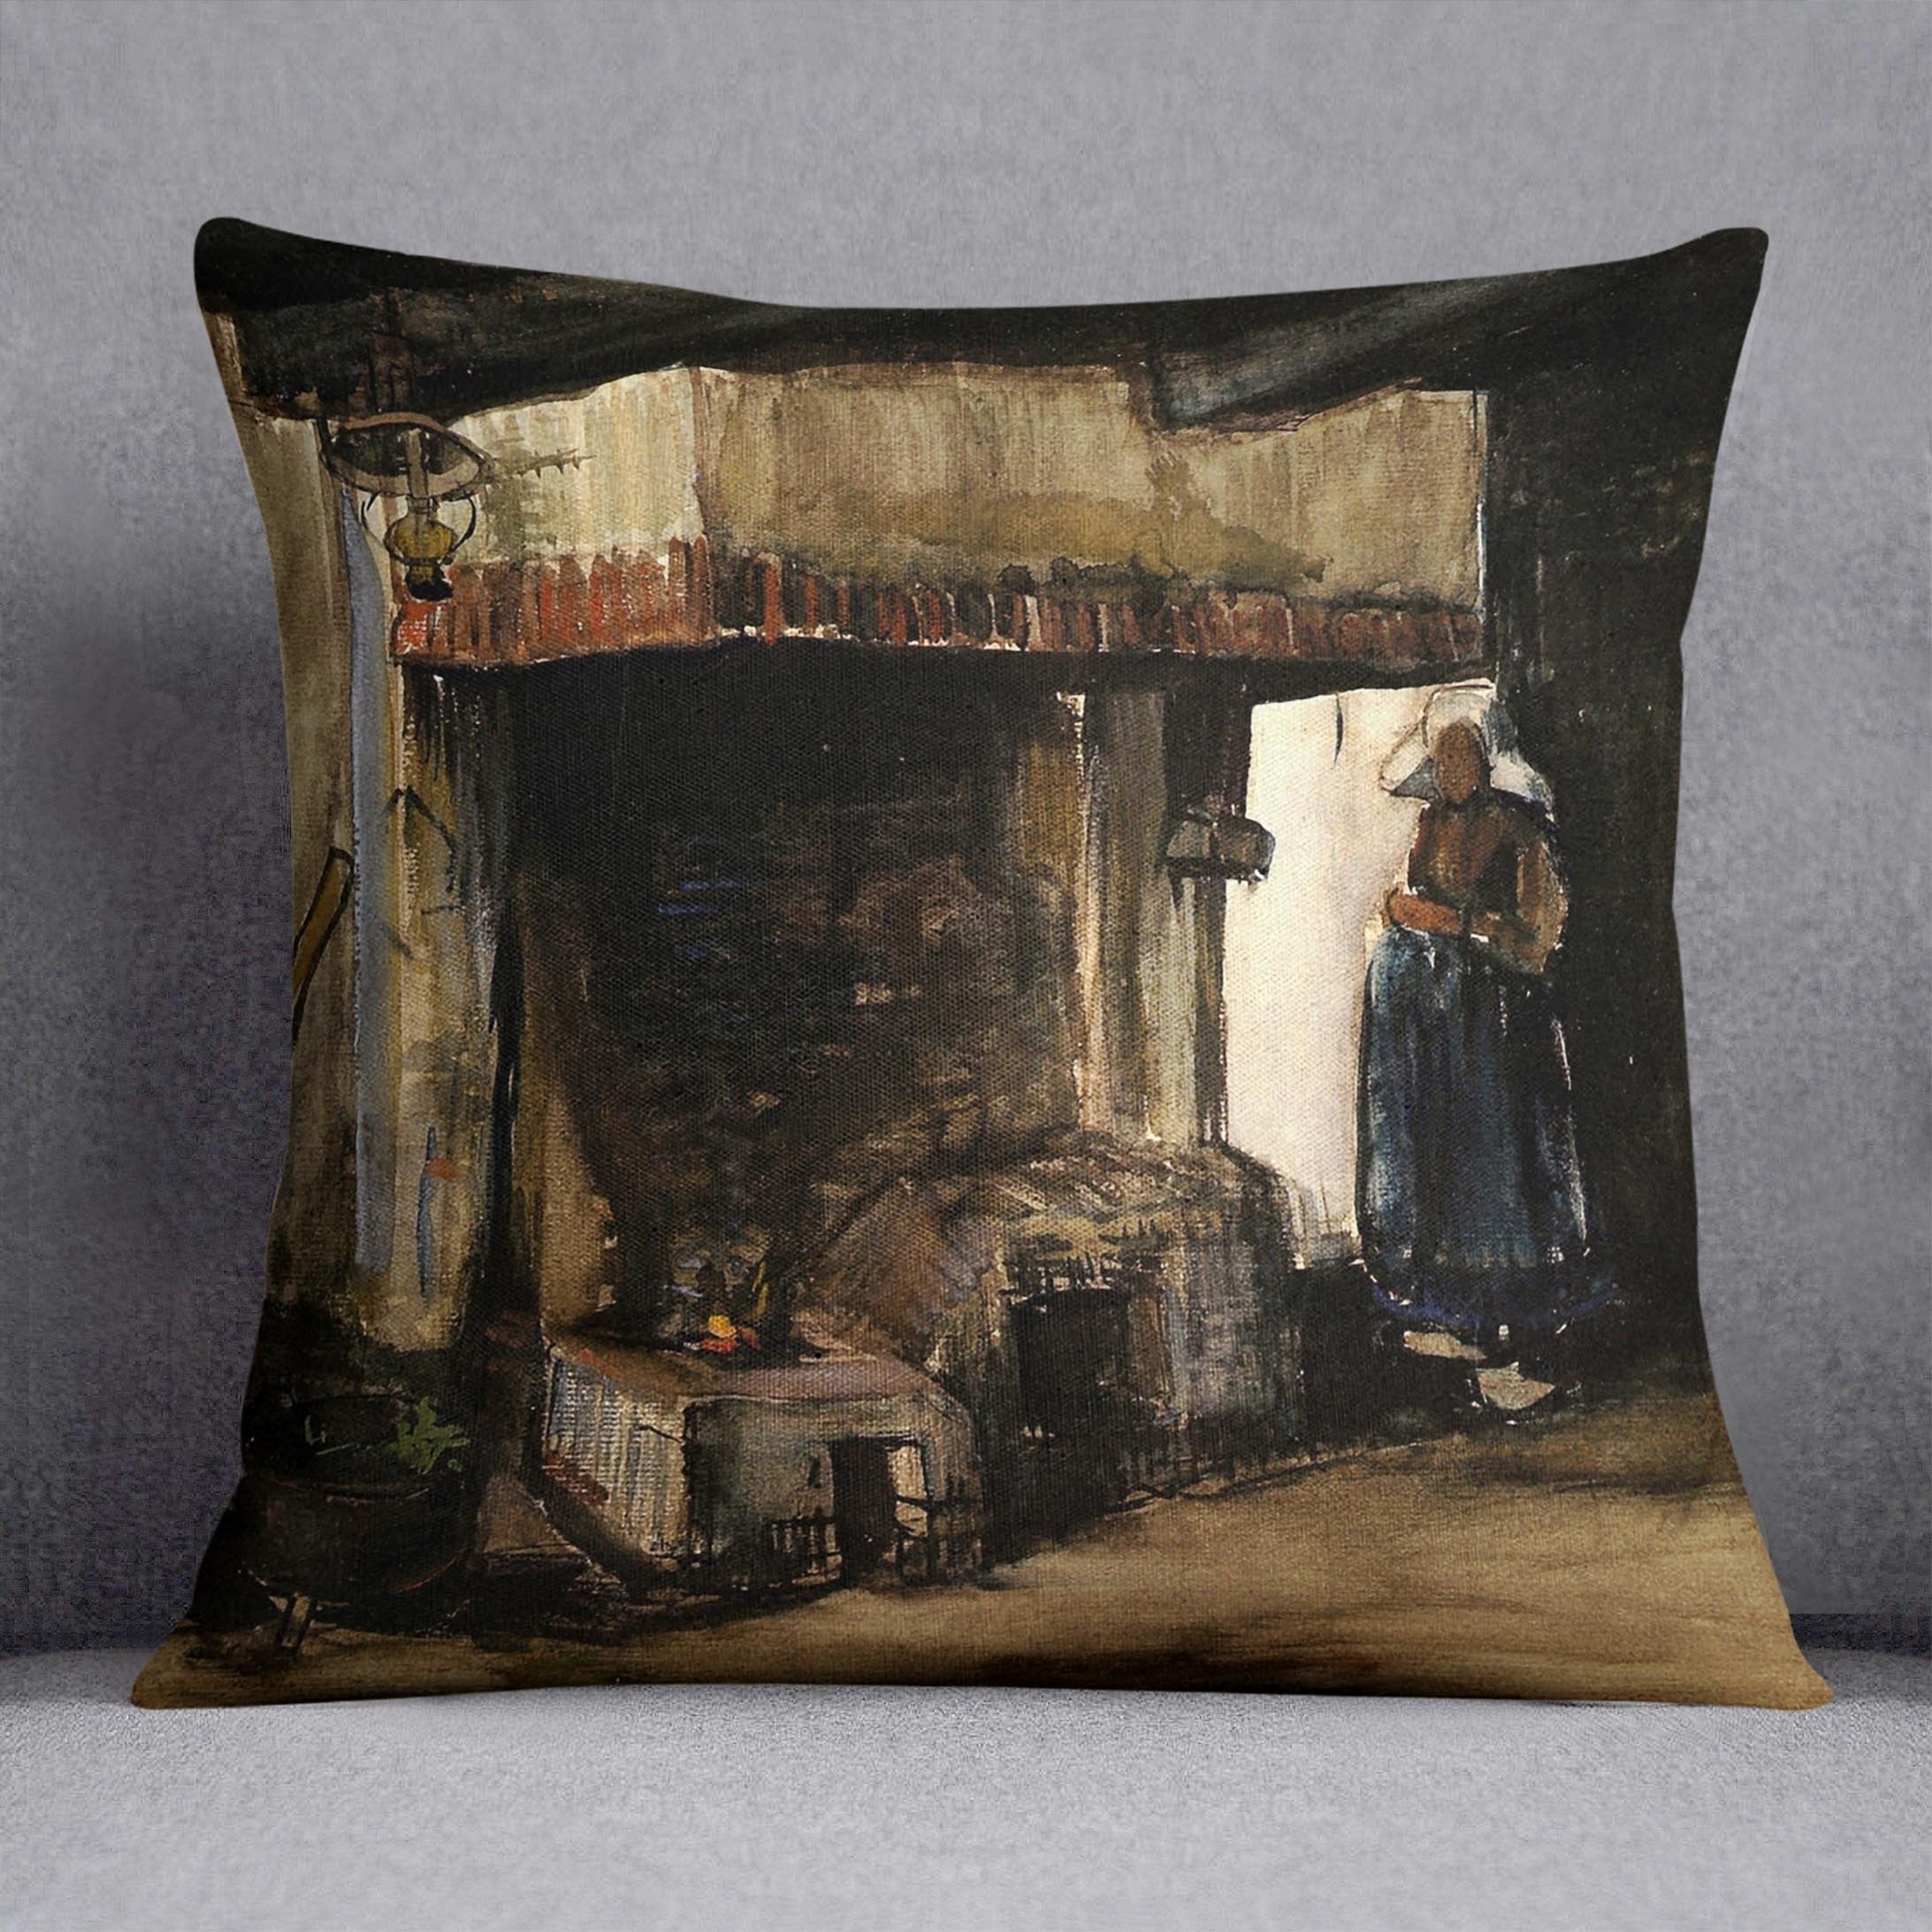 Woman by a Hearth by Van Gogh Throw Pillow